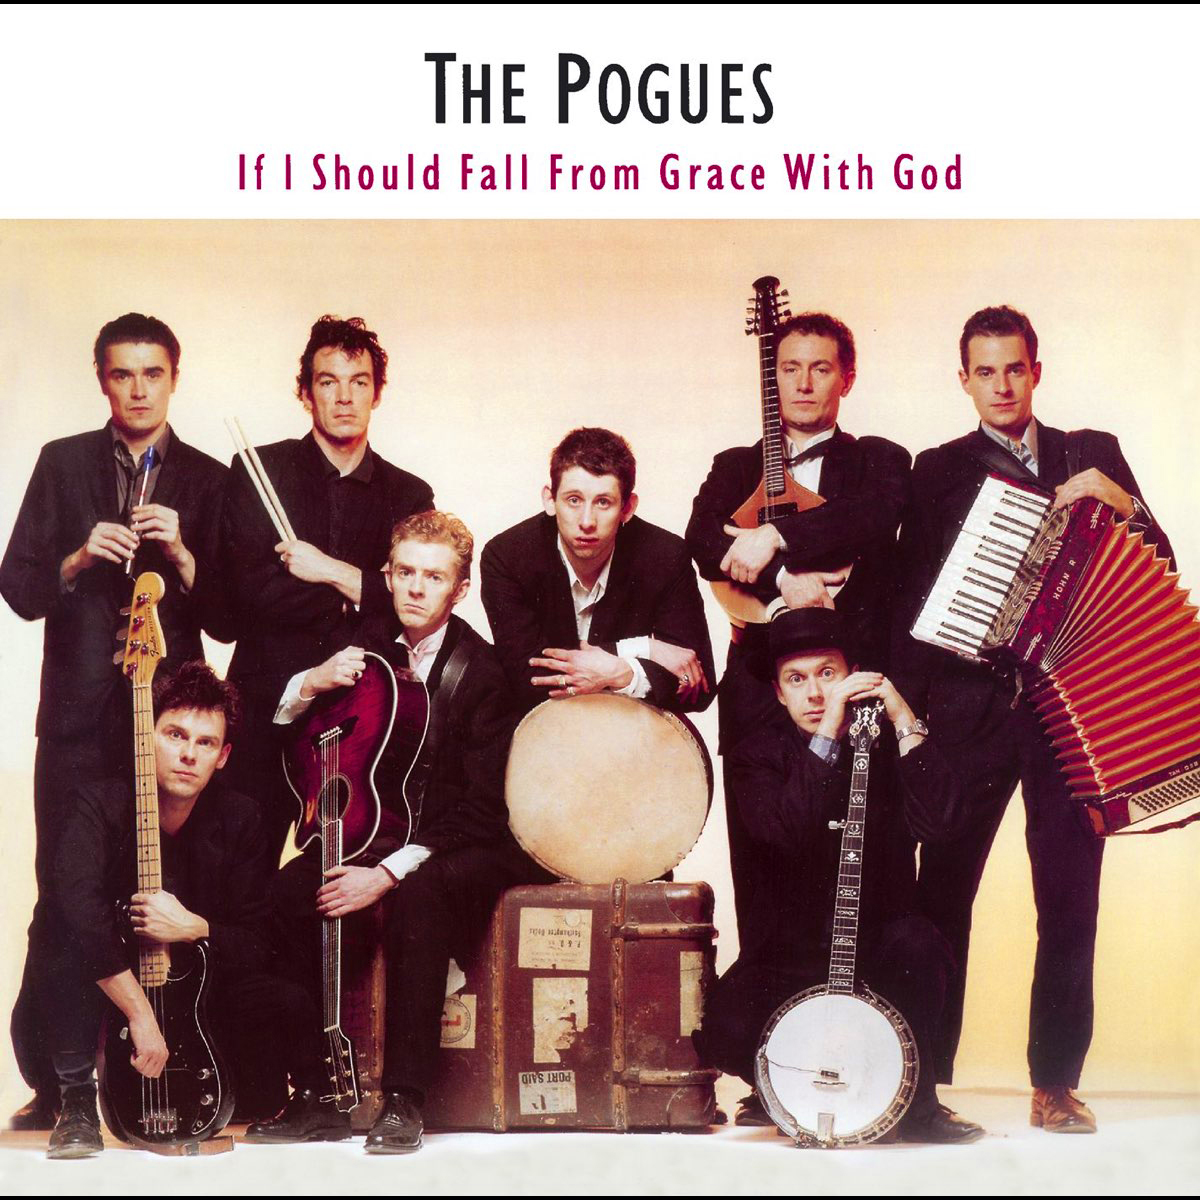 If I Should Fall From Grace With God : #ThePogues